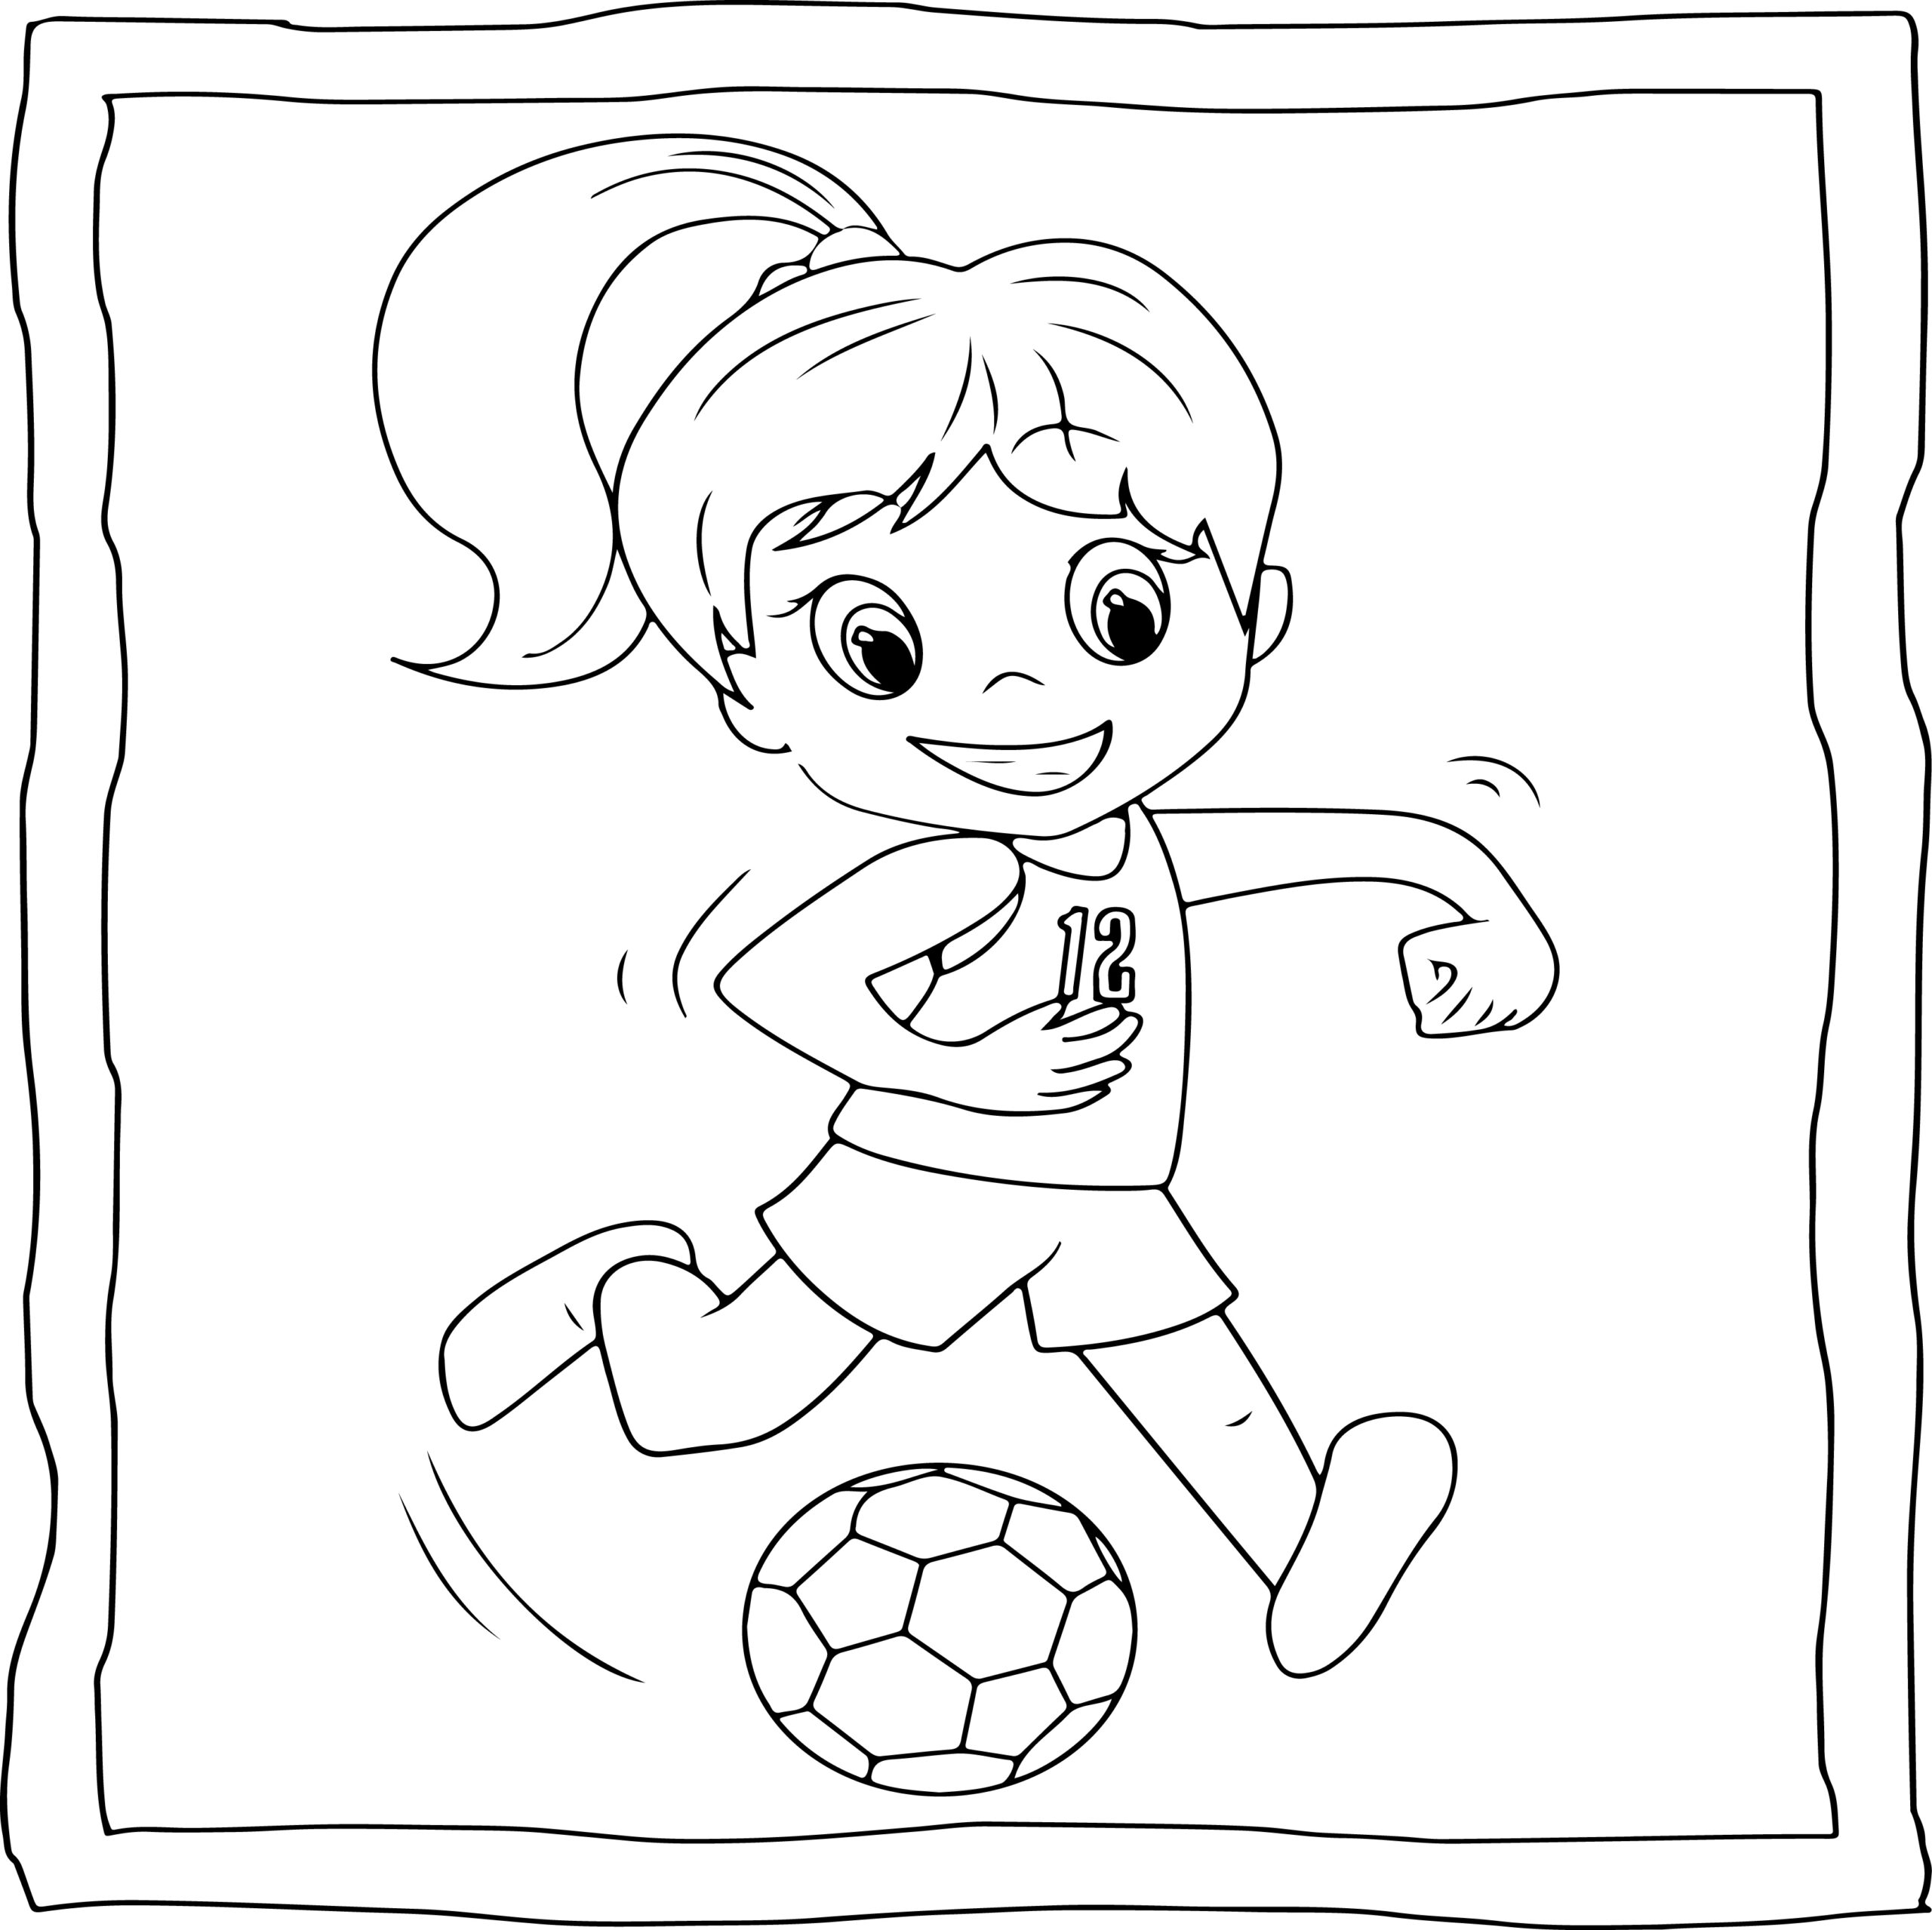 Football coloring book easy and fun football coloring pages for kids made by teachers